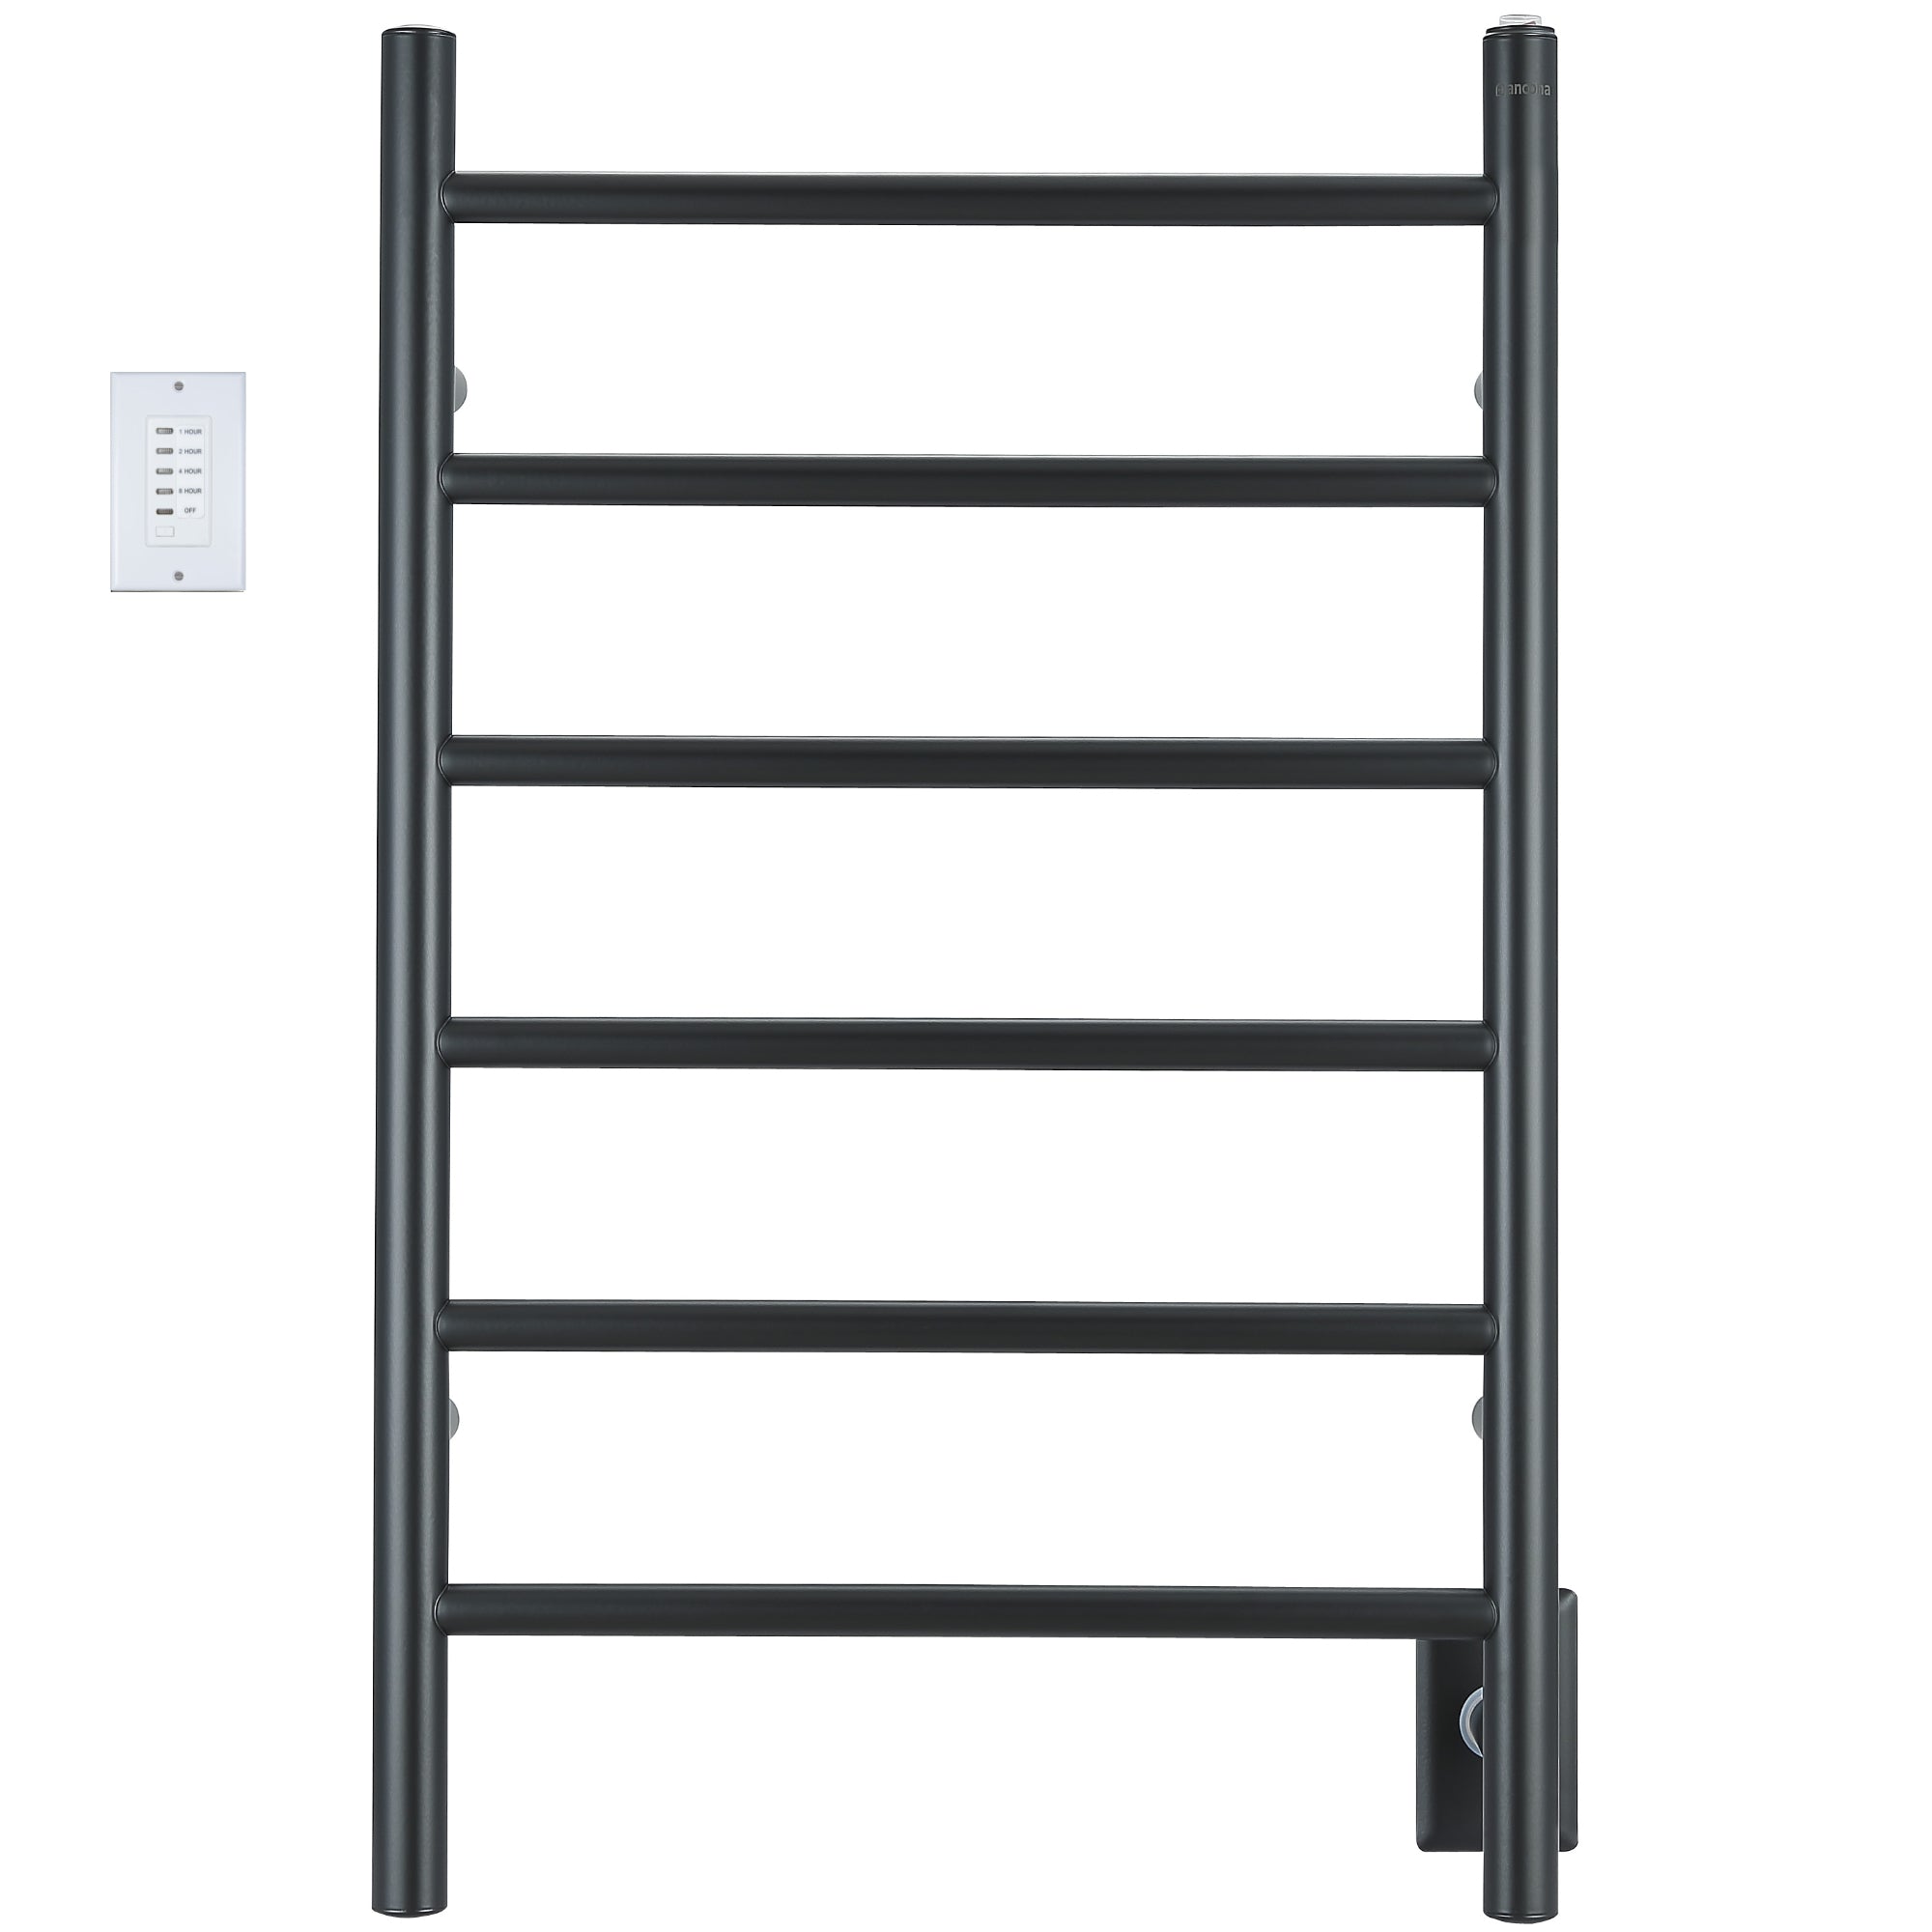 Ancona Comfort 6 Wall Mount Plug-In and Hardwire Towel Warmer with Countdown Timer in Matte Black